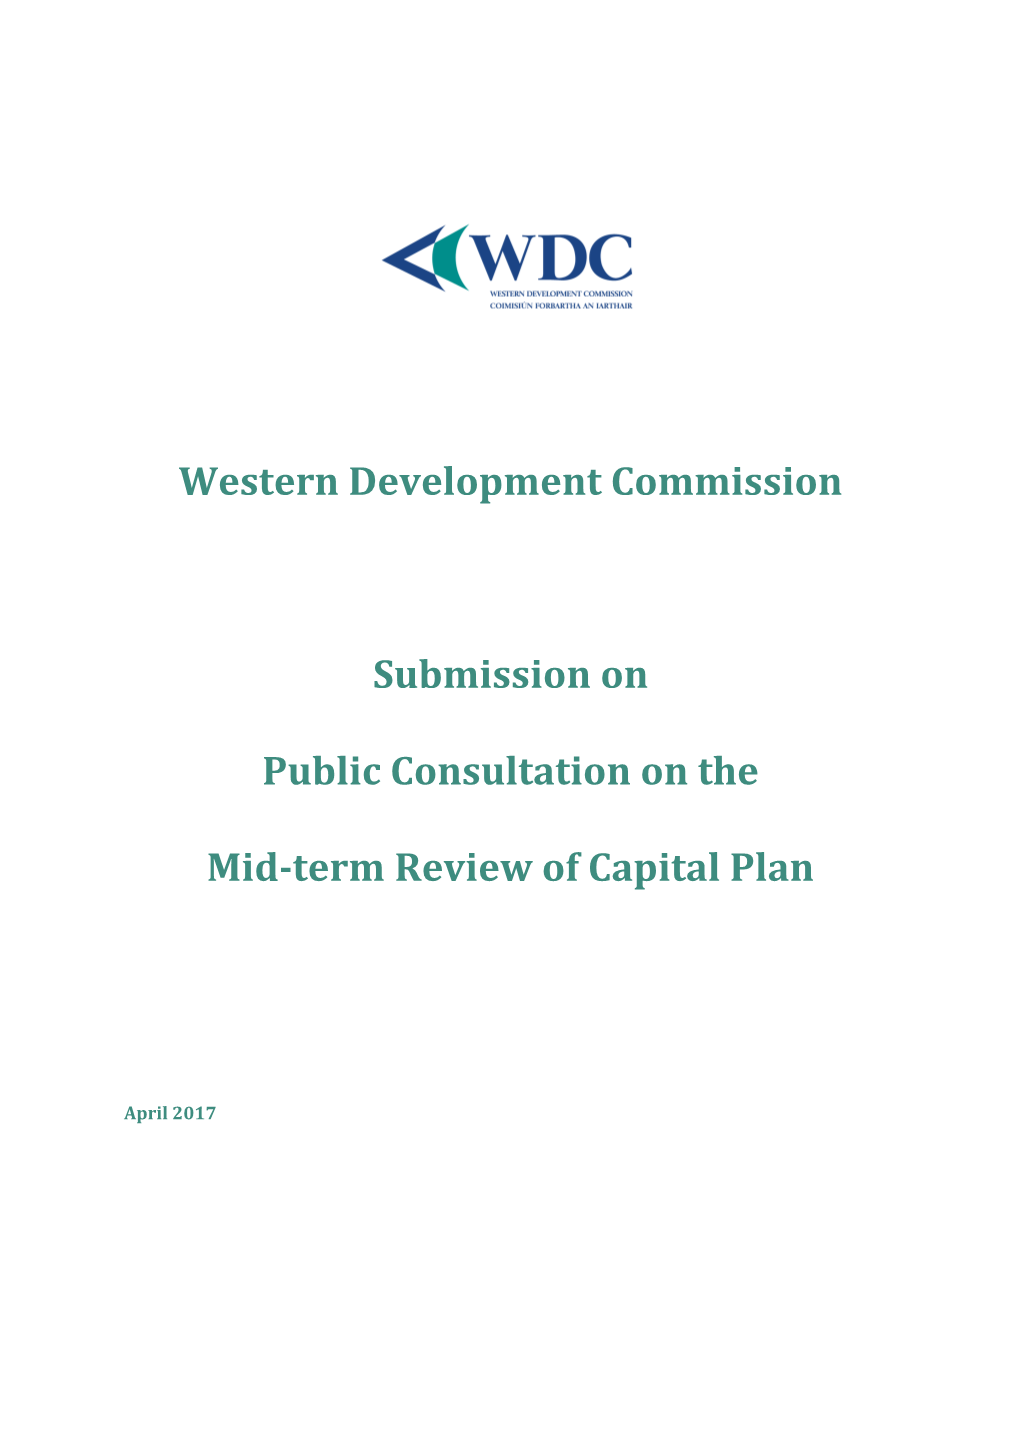 Western Development Commission Submission on Public Consultation